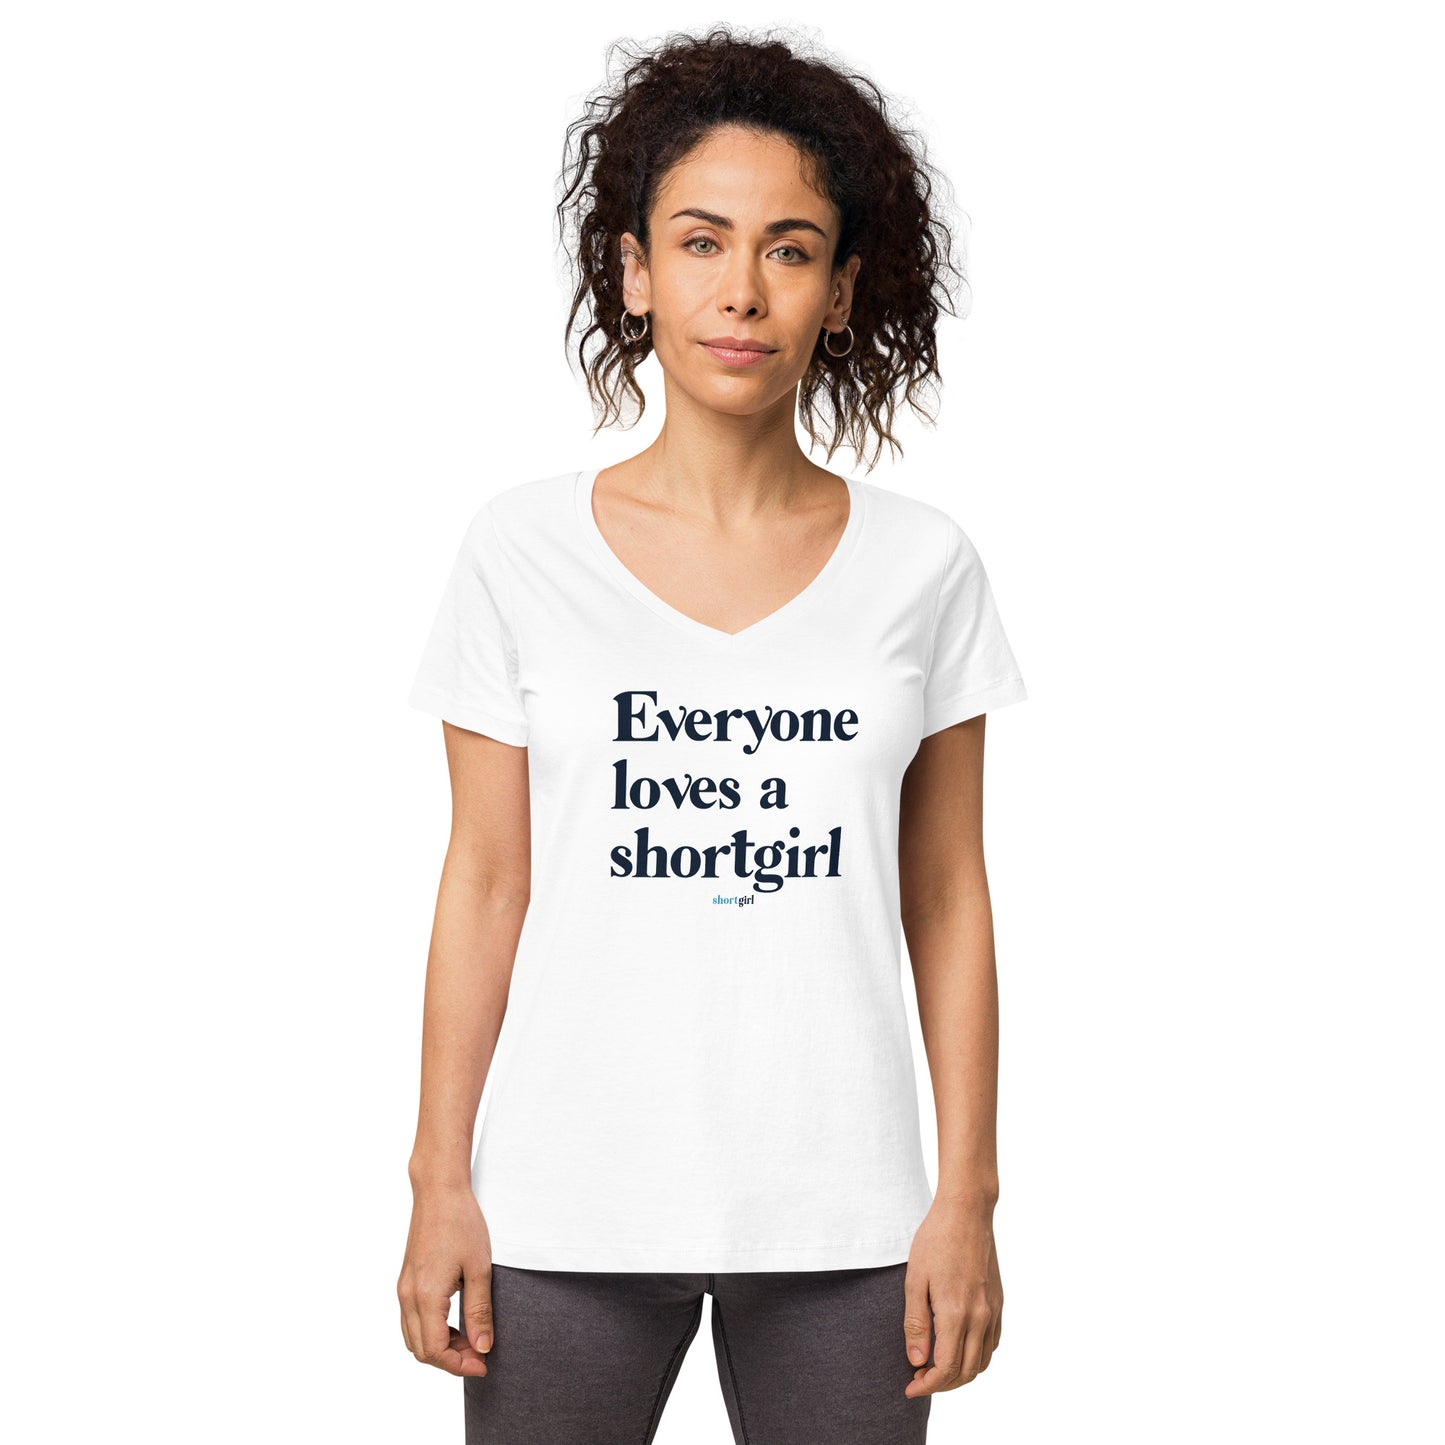 Women’s fitted v-neck t-shirt - Everyone loves a shortgirl